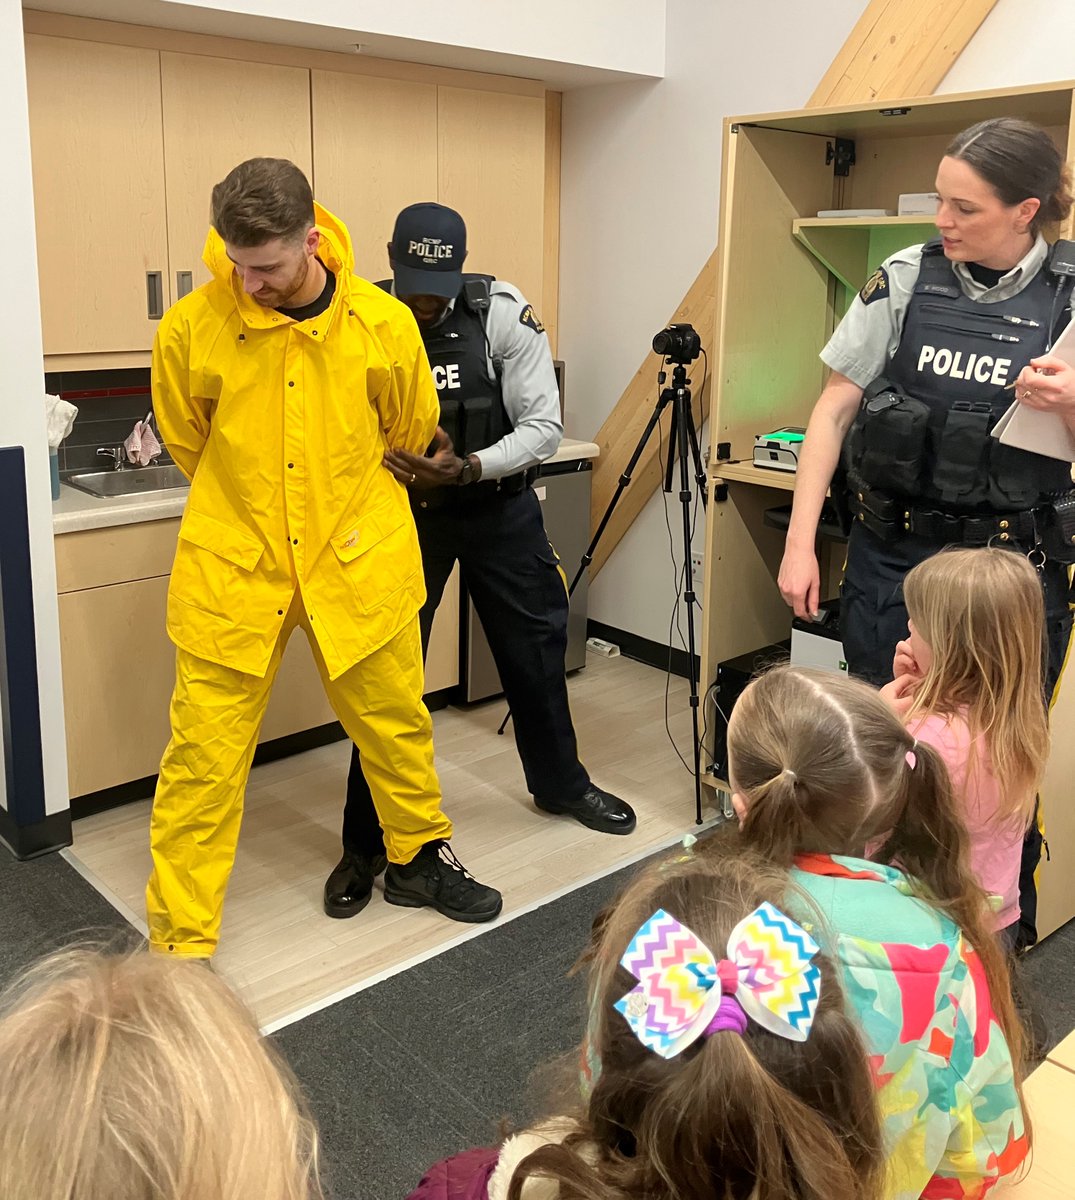 Burin Peninsula #RCMPNL welcomed the Marystown Sparks & Embers to the local Detachment on April 15. They participated in a fictional scenario where they reviewed surveillance footage, collected evidence & ultimately located & arrested their suspect. They did a fantastic job!